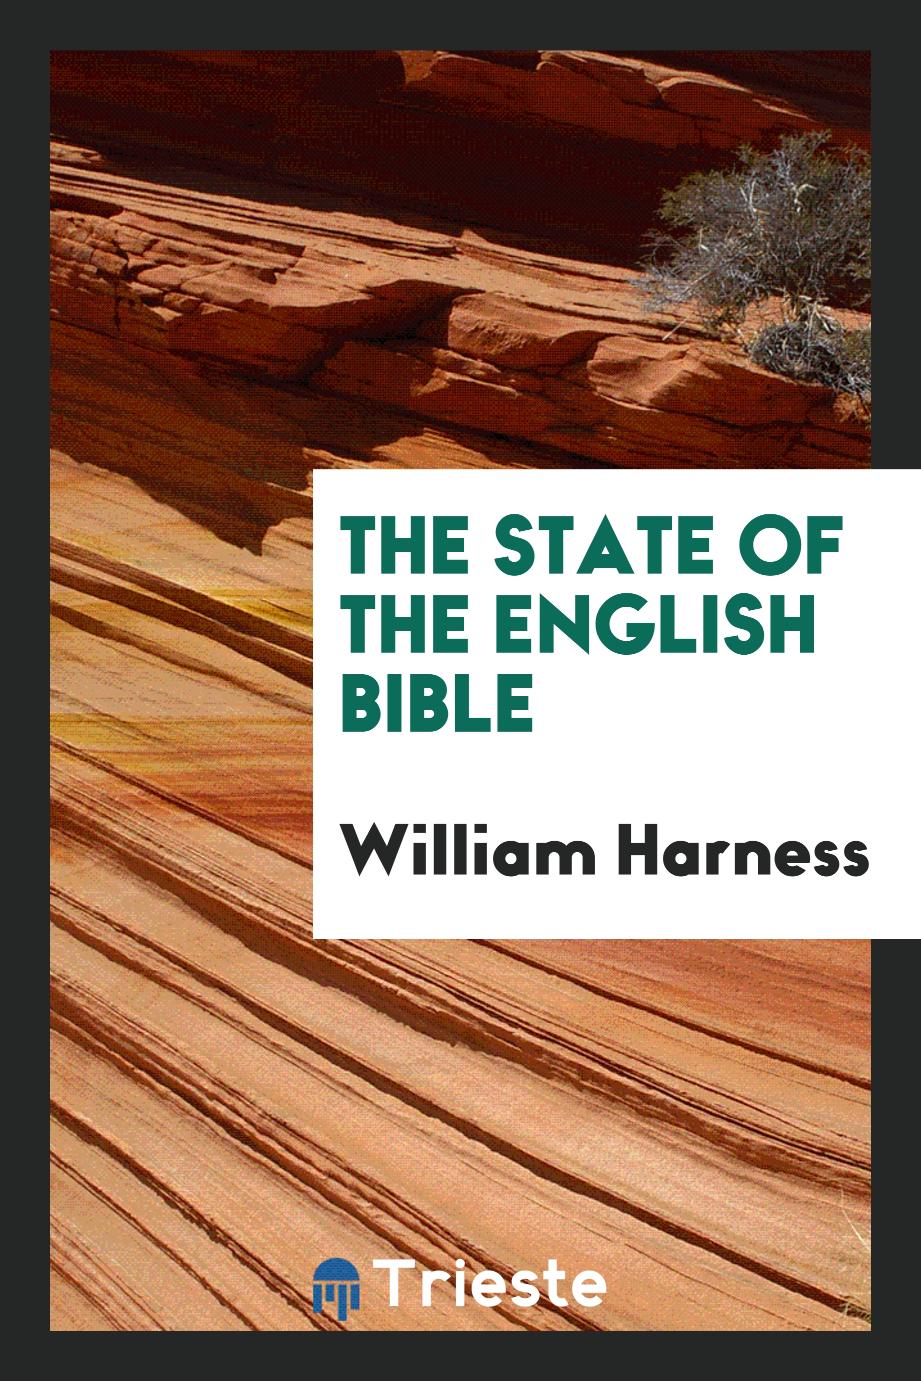 The State of the English Bible